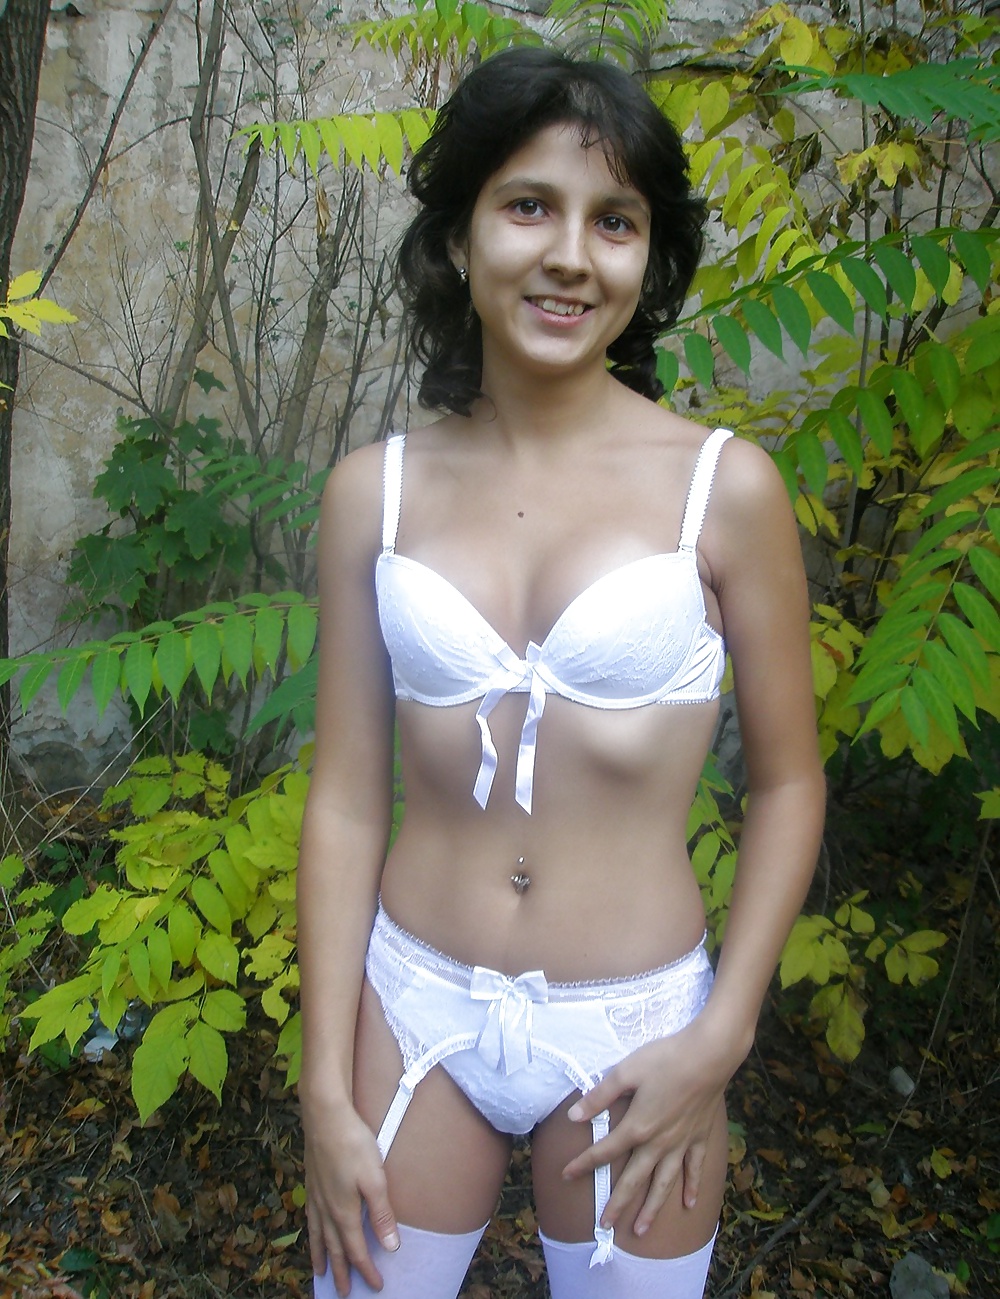 Amateur slut with small tits - naked outdoors adult photos